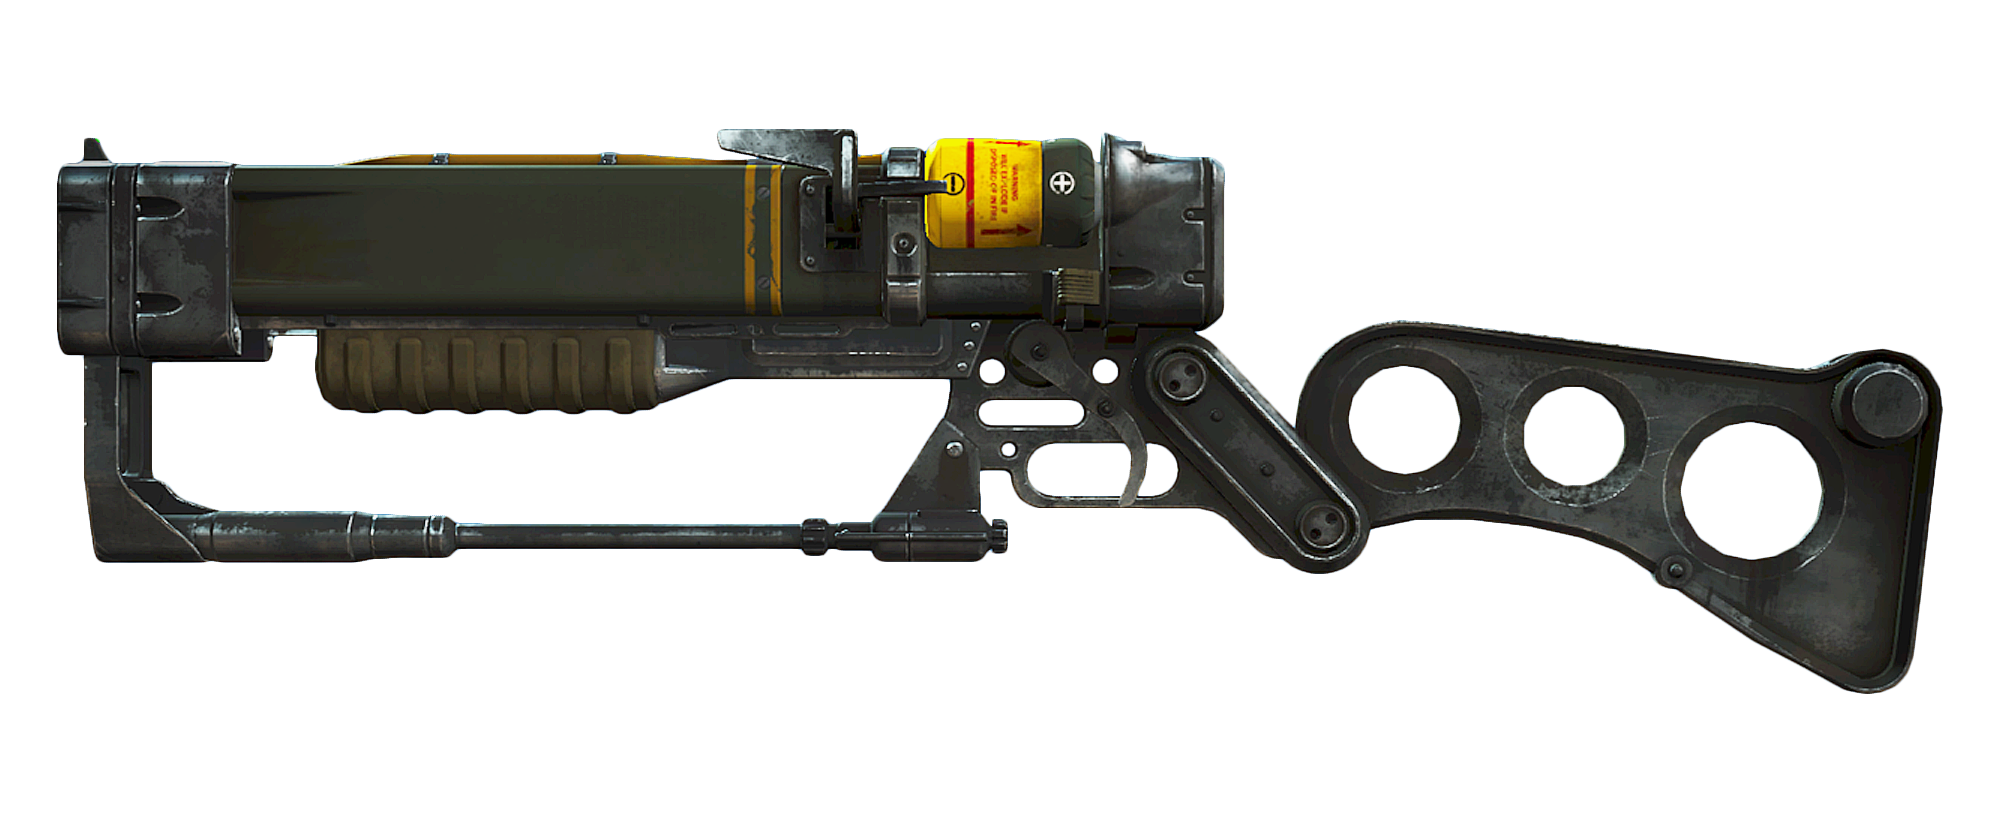 best energy weapon fallout new vegas